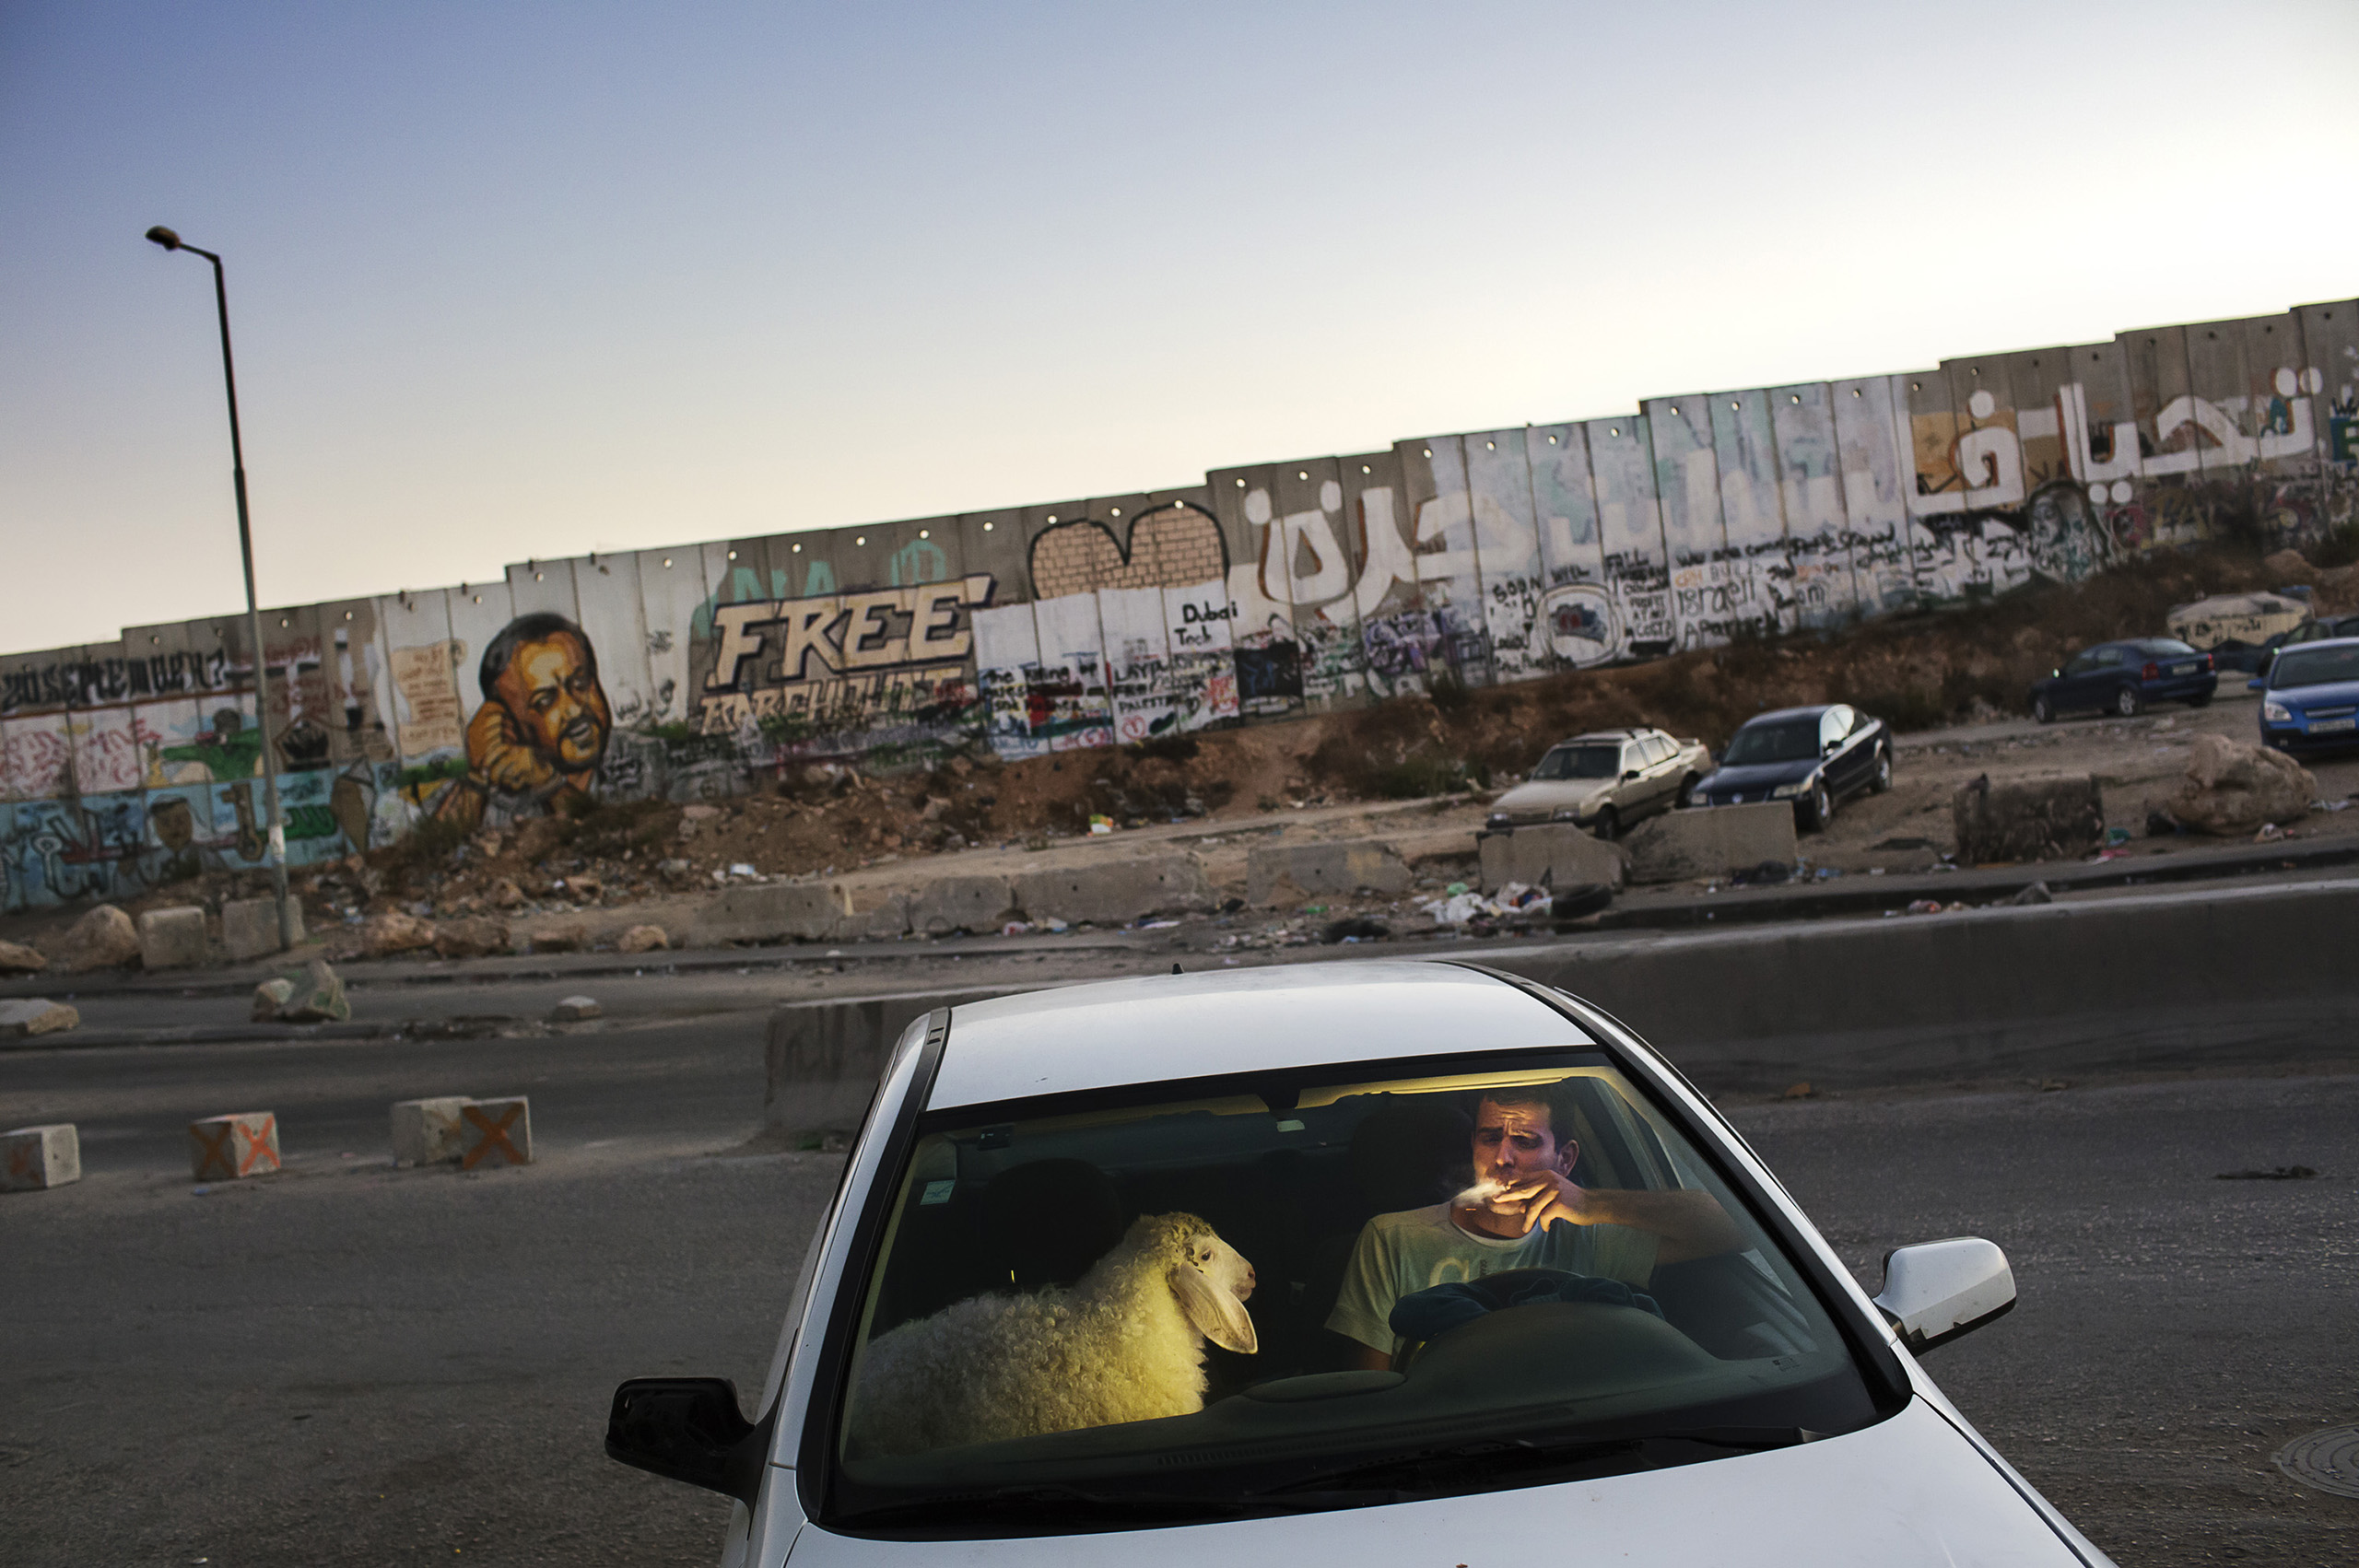 After grueling traffic at the Qalandia checkpoint, a young man enjoys a cigarette in his car as traffic finally clears on the last evening of Ramadan. He is bringing home a sheep for the upcoming Eid celebration.